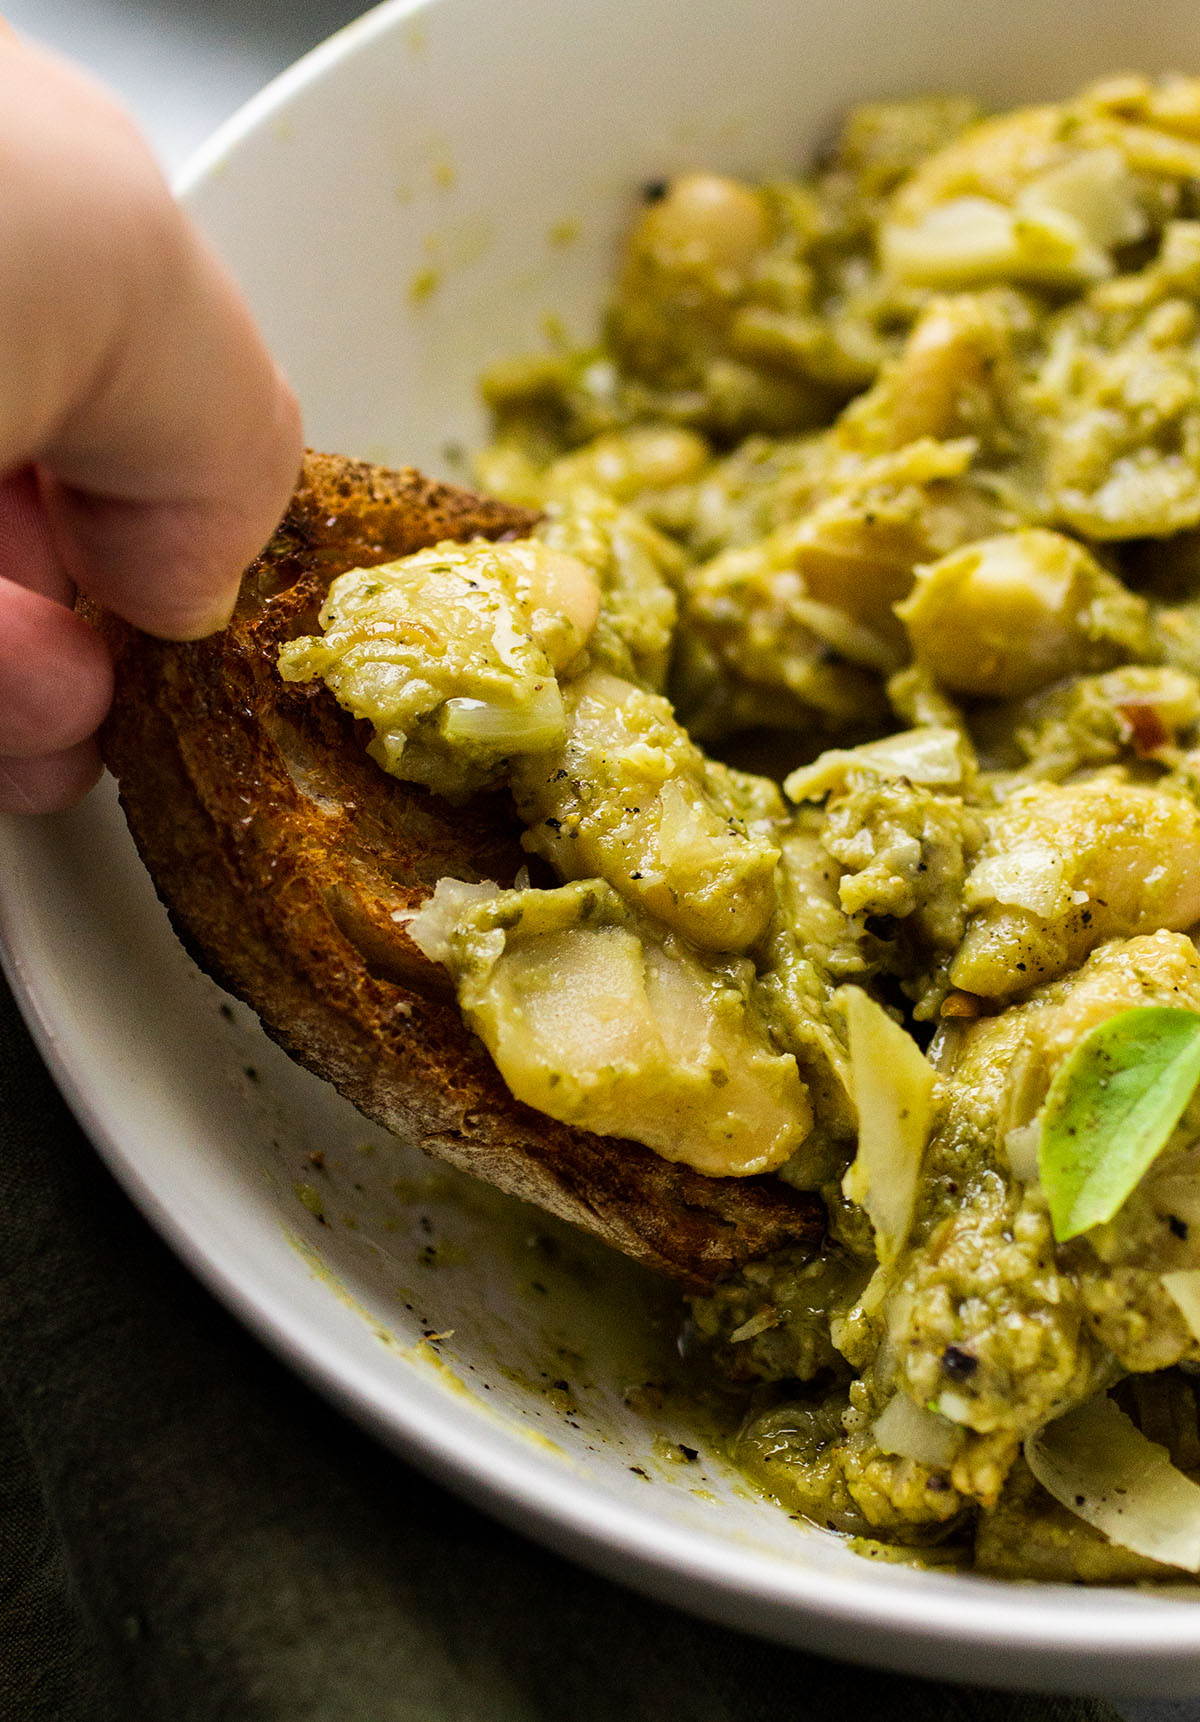 Dipping a slice of toasted bread into a bowl of pesto beans.